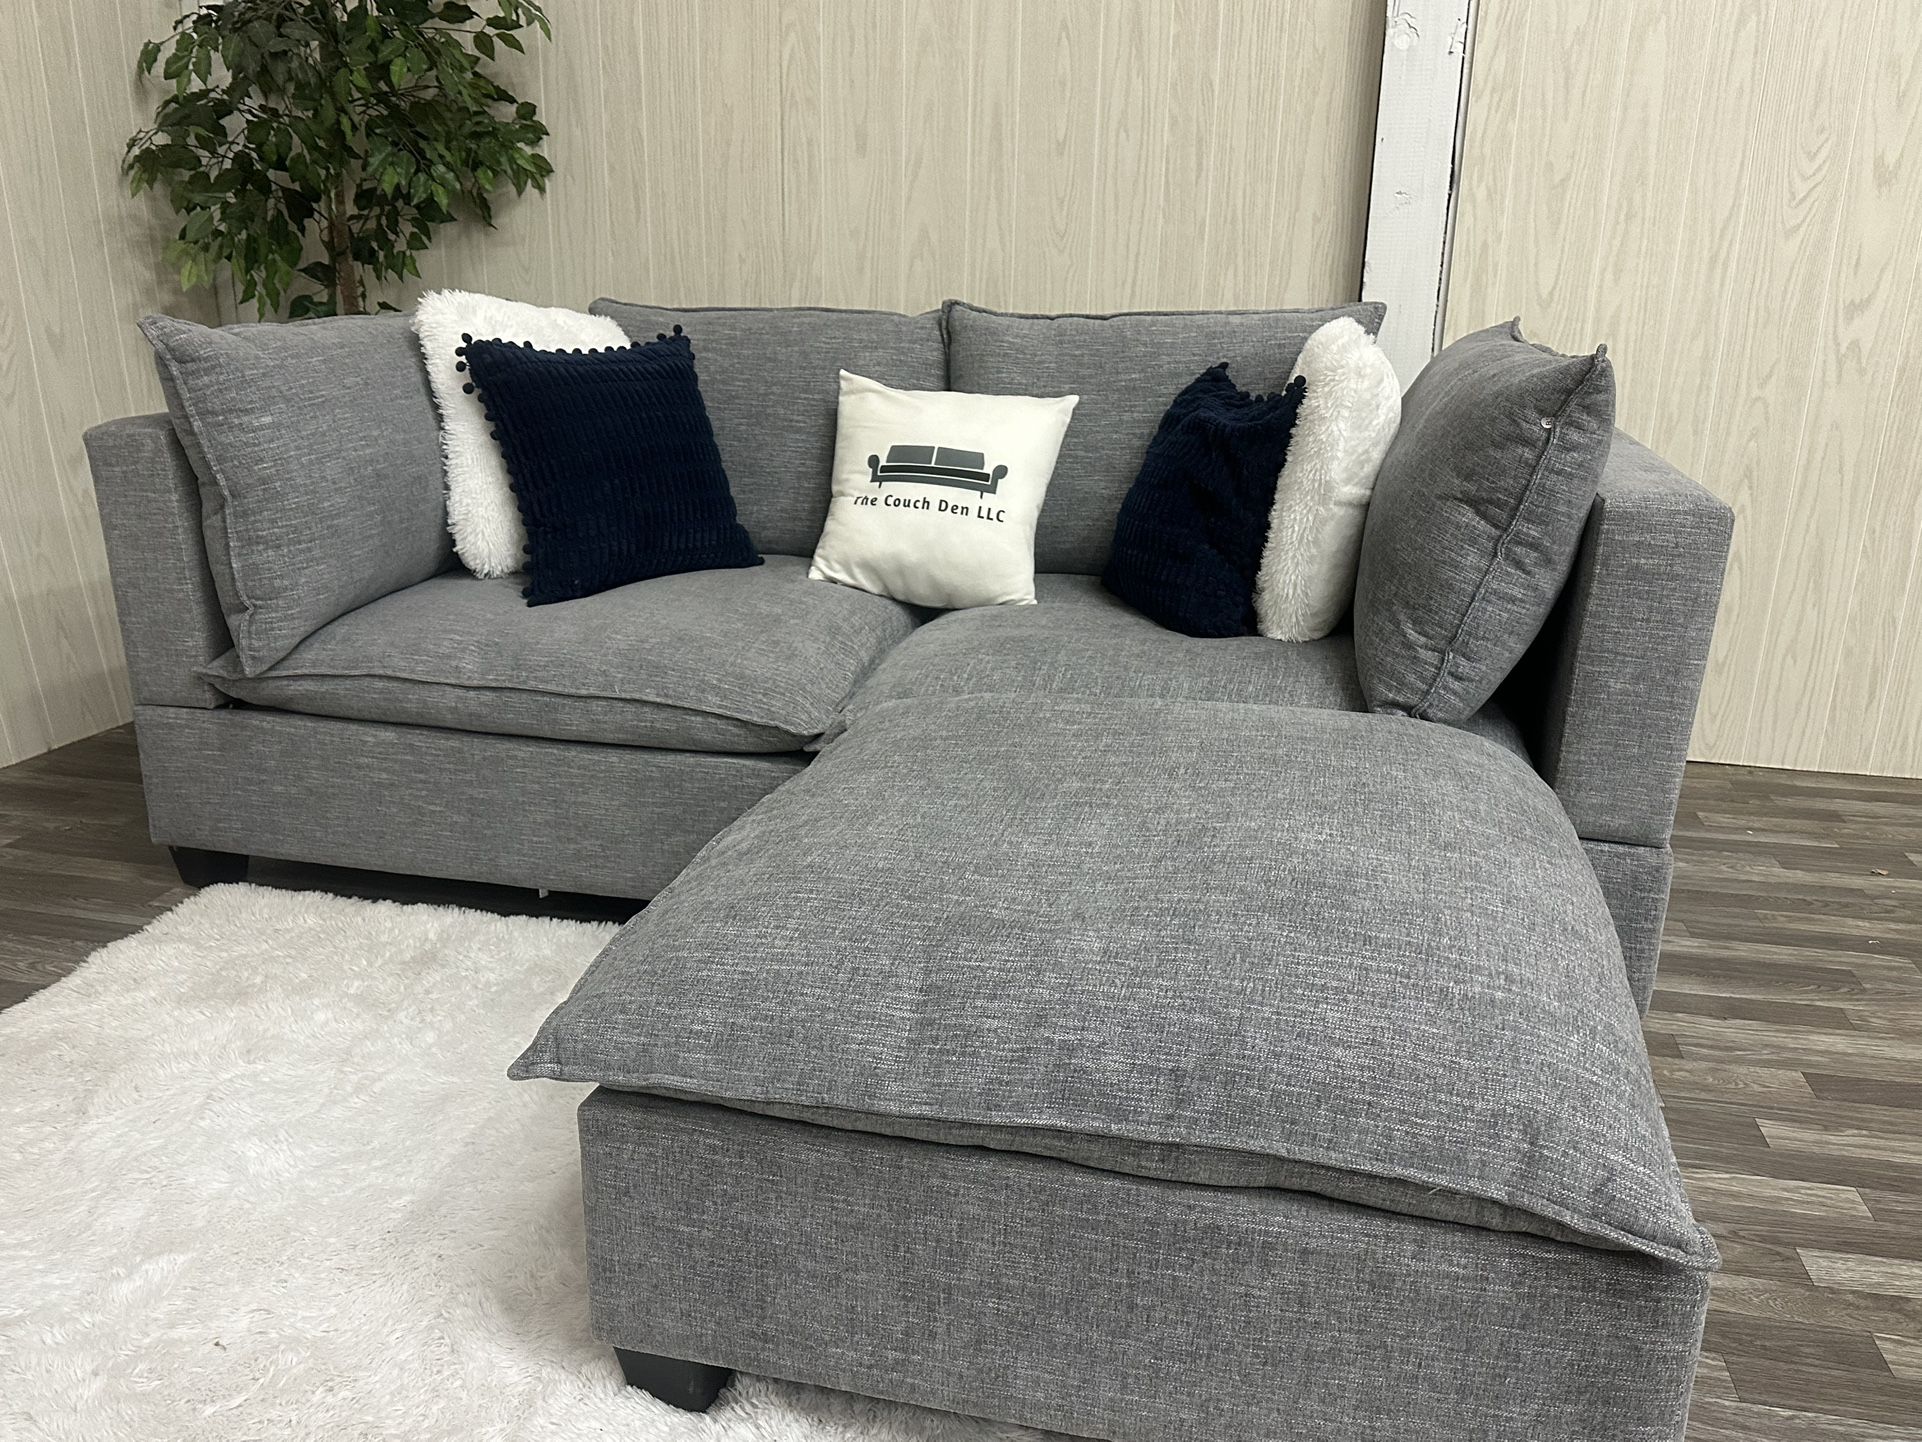 NEW! Gray Cloud Sectional Couch - Delivery Available 